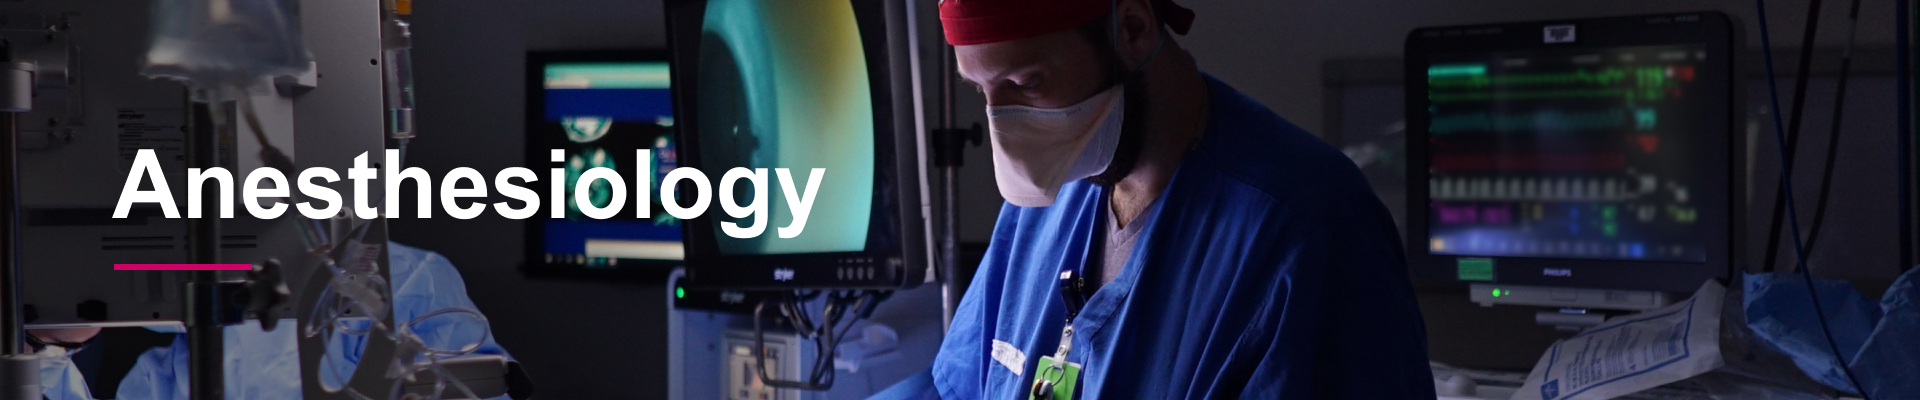 Anesthesiology Training Banner